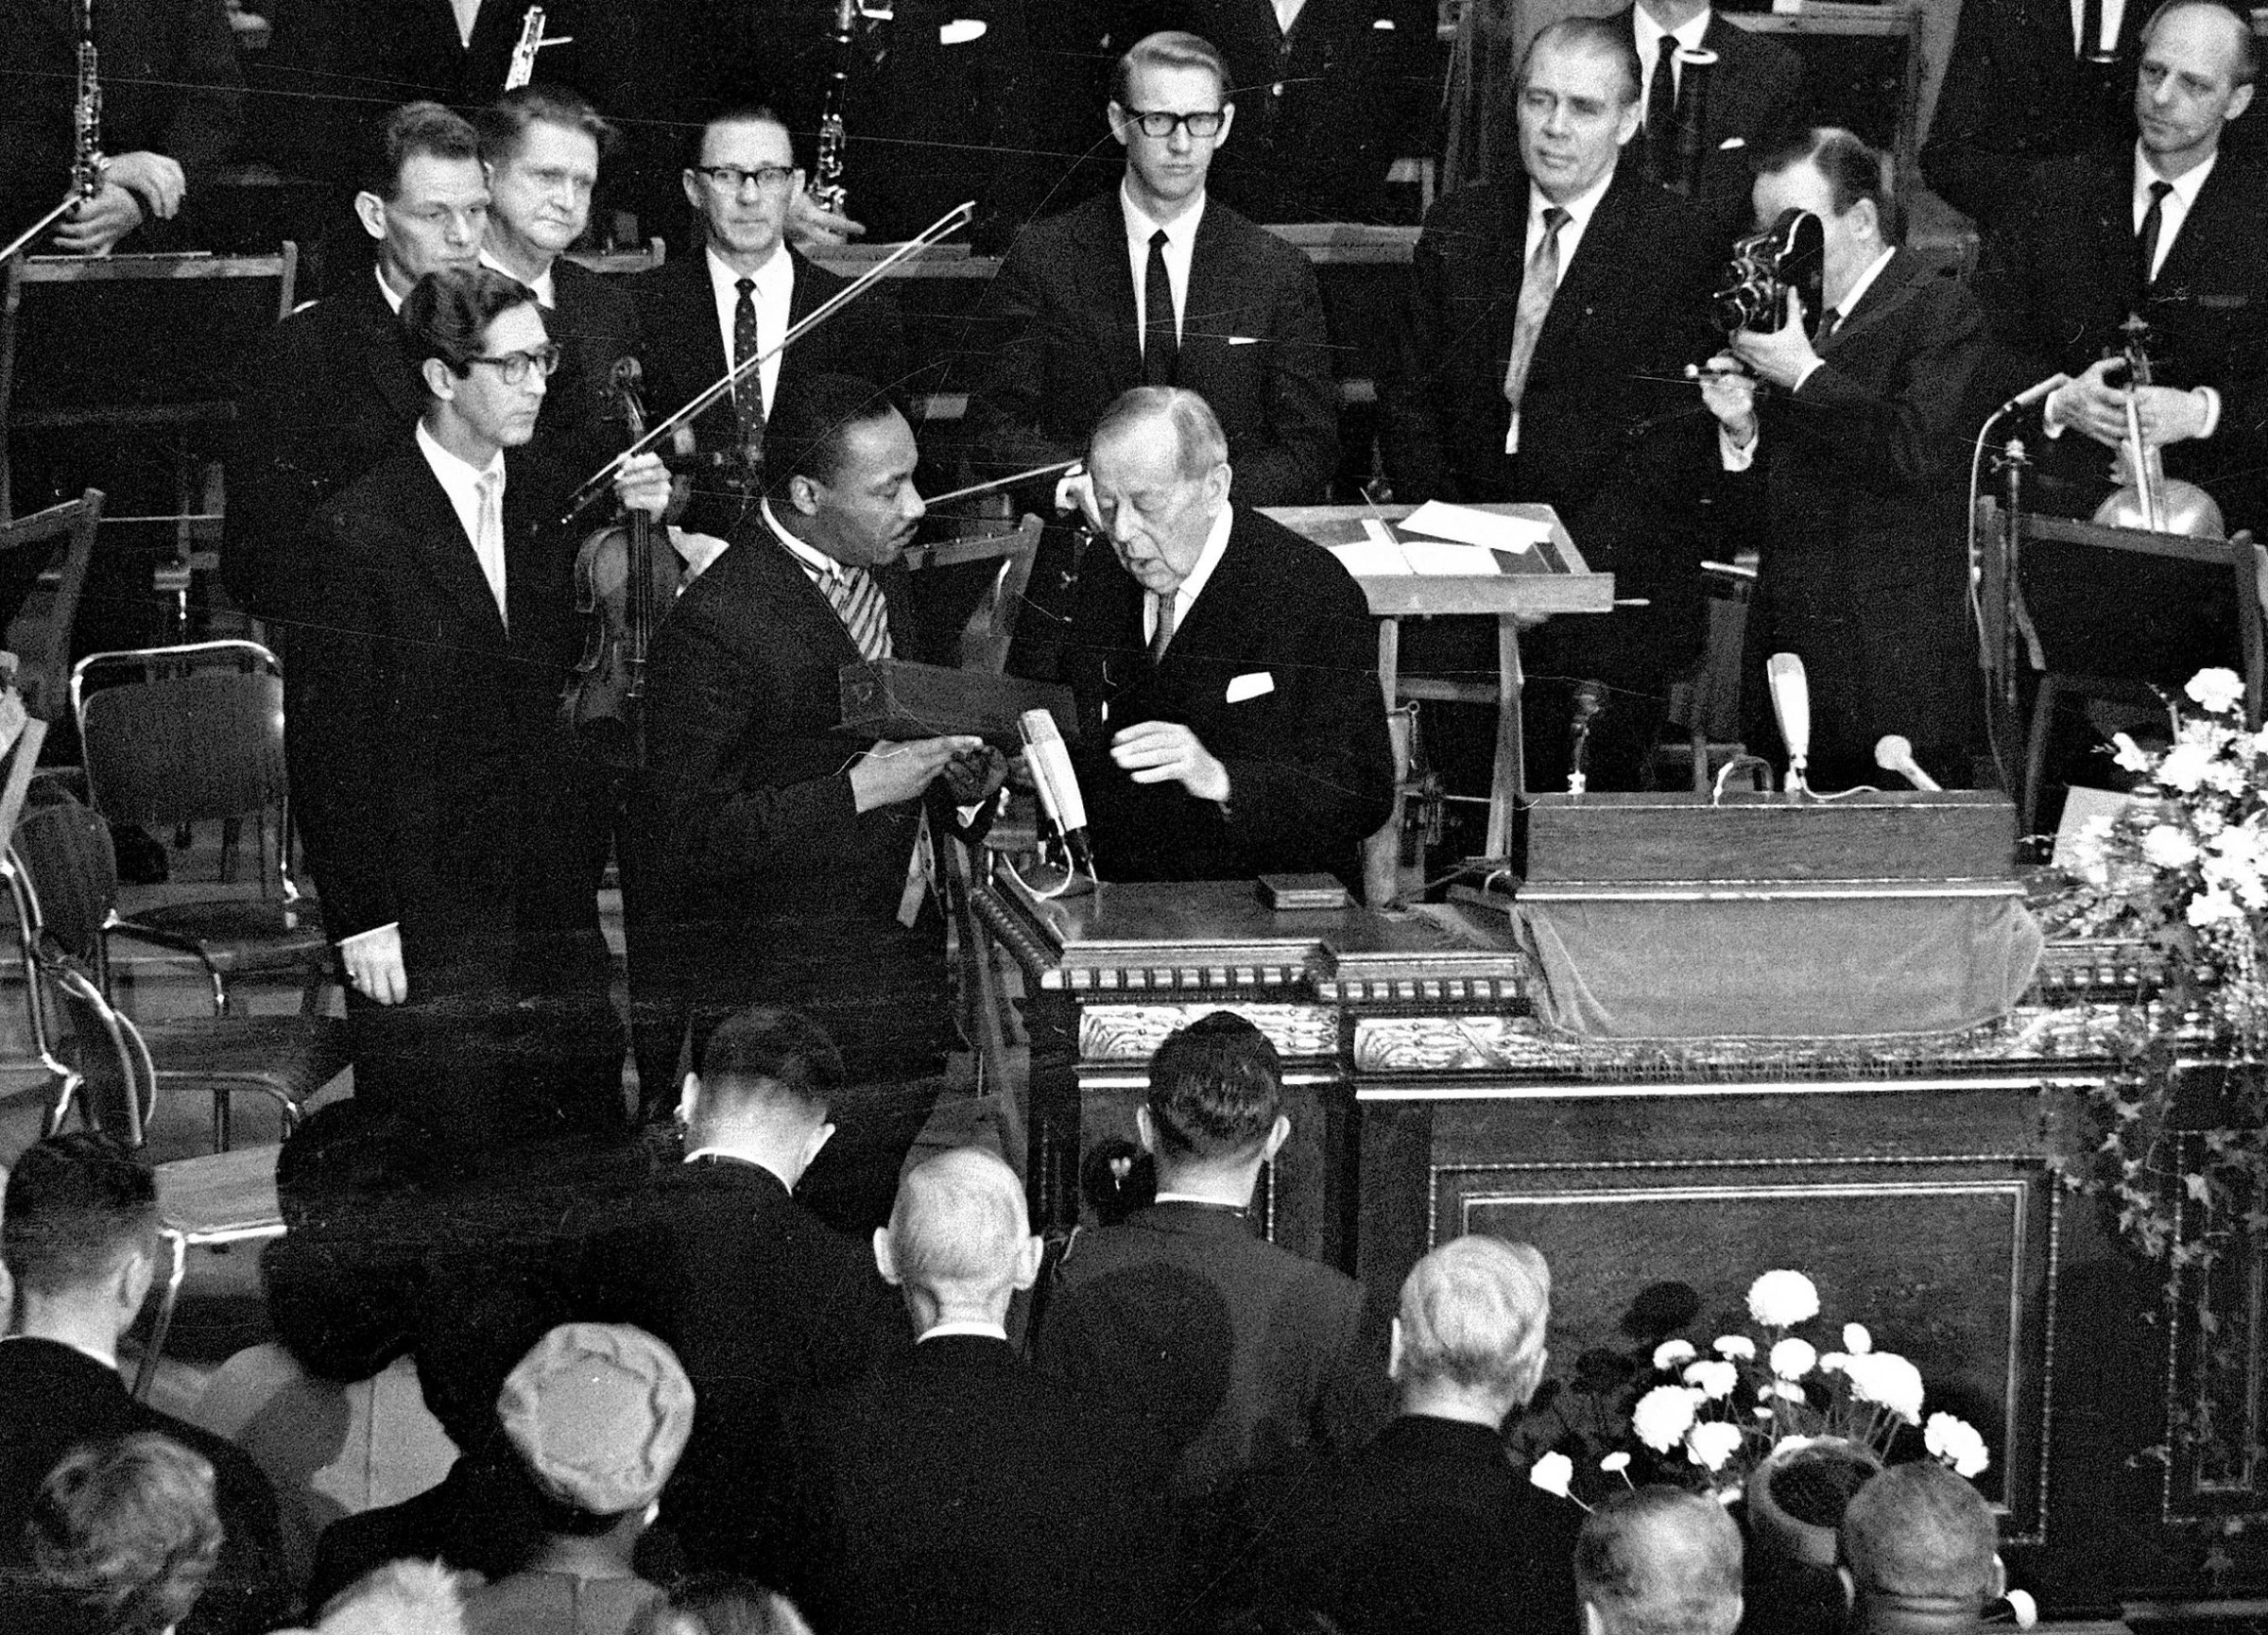 In this Dec. 10, 1964, file photo, U.S. civil rights leader Rev. Dr. Martin Luther King receives the Nobel Peace Prize from Gunnar Jahn, chairman of the Nobel Committee, in Oslo, Norway. (AP Photo, File)